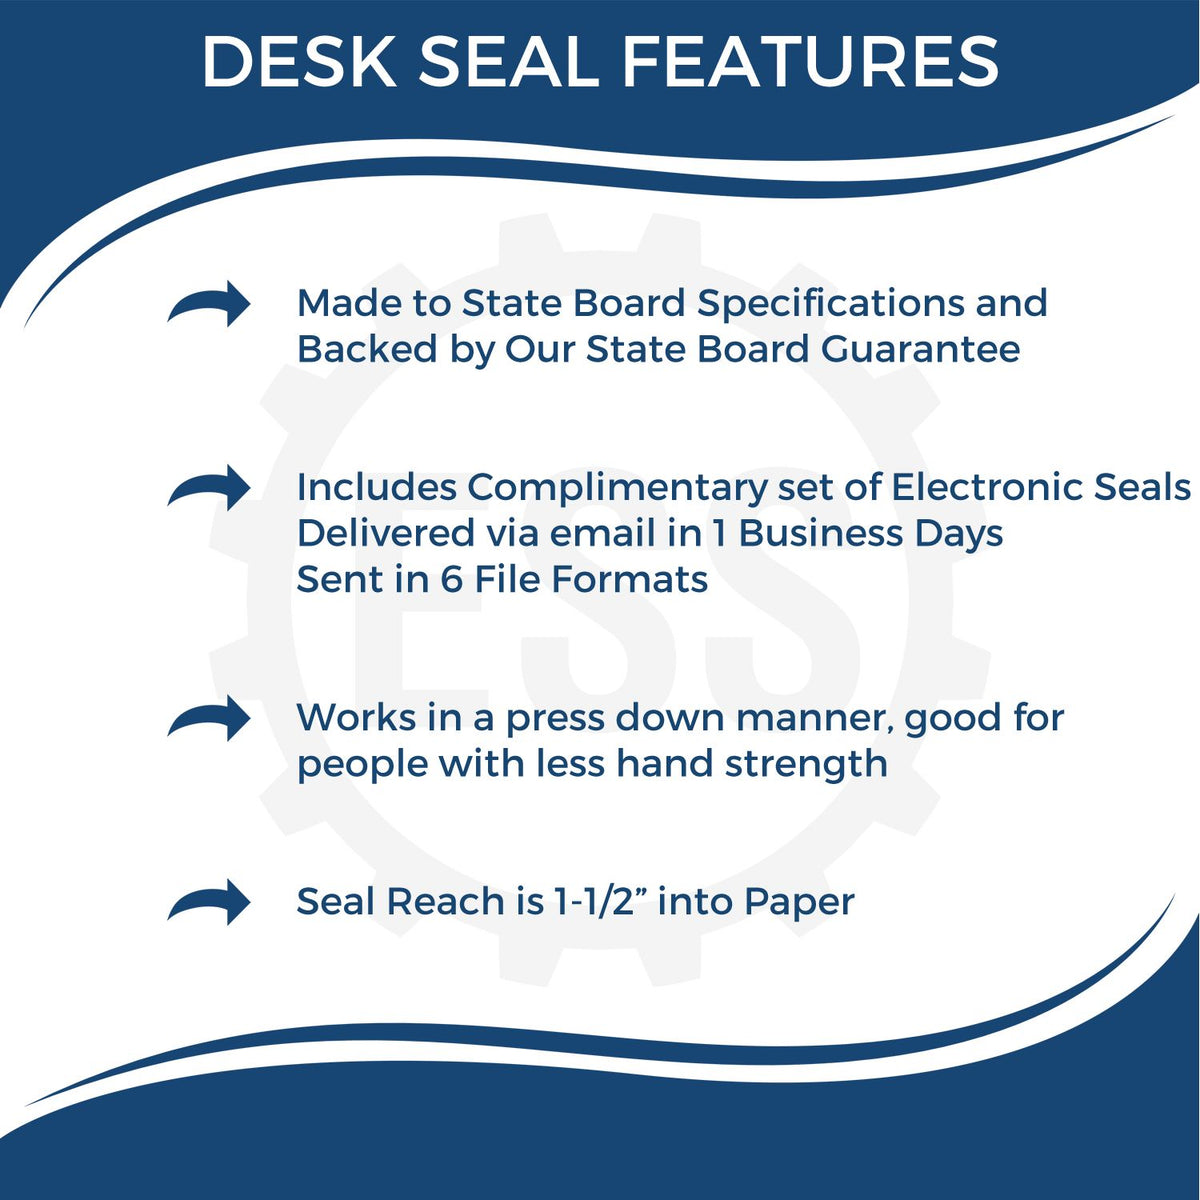 A picture of an infographic highlighting the selling points for the Arkansas Engineer Desk Seal